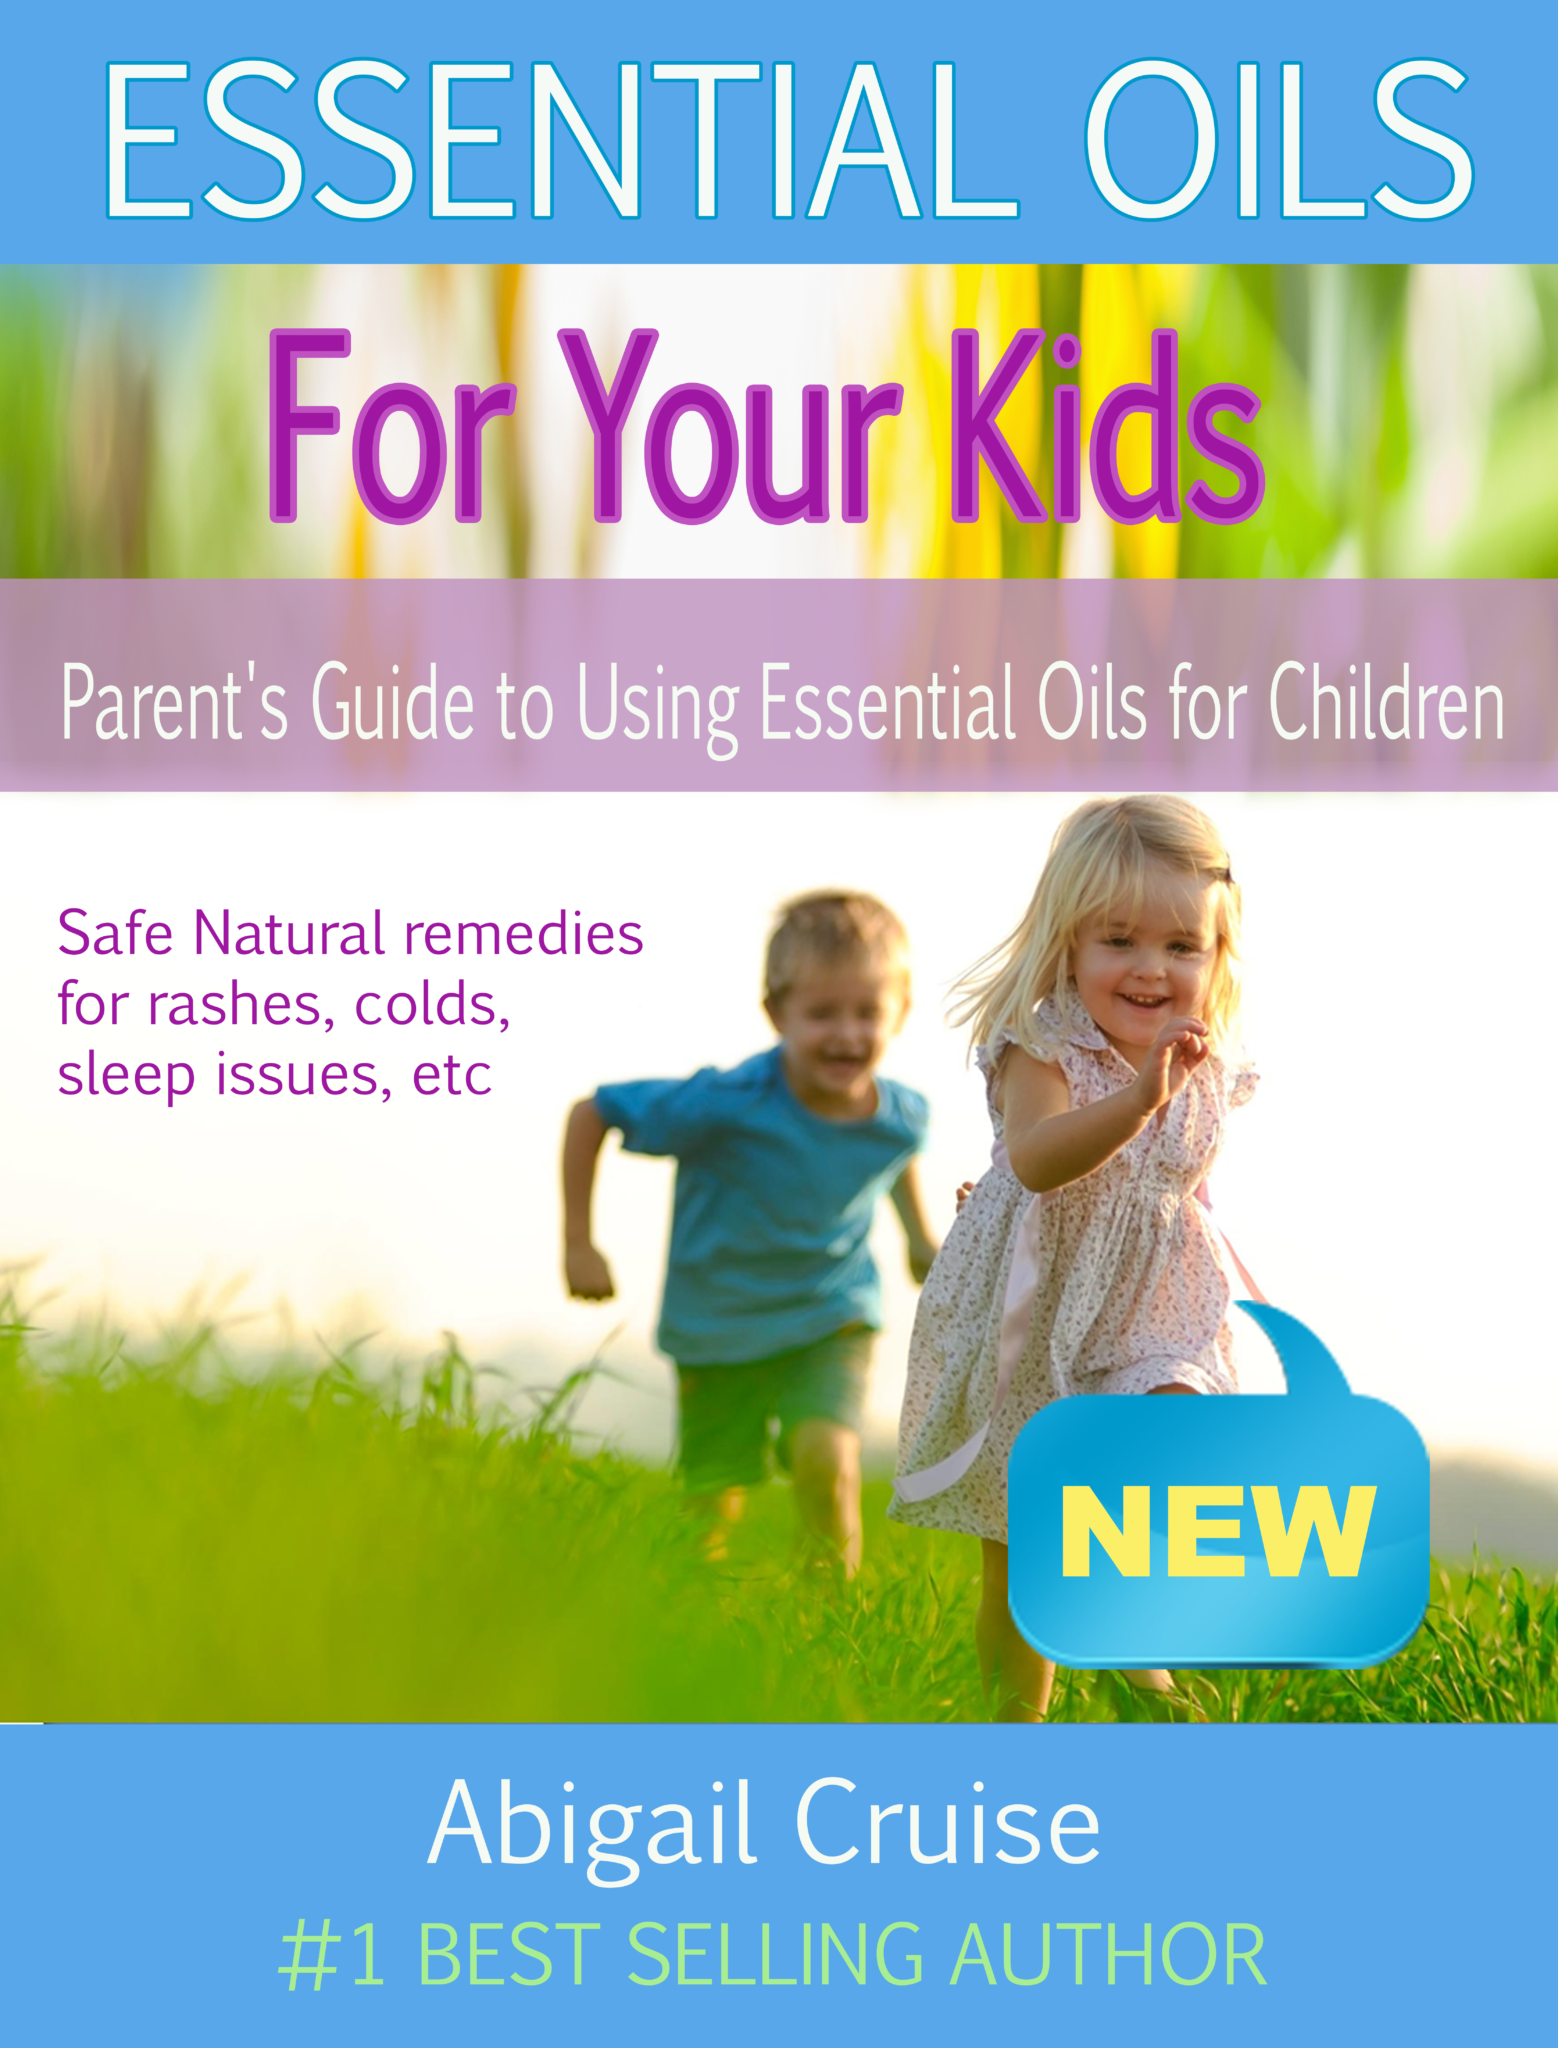 FREE: Essential Oils For Kids: Parent’s Guide to Using Essential Oils for Children by Abigail Cruise